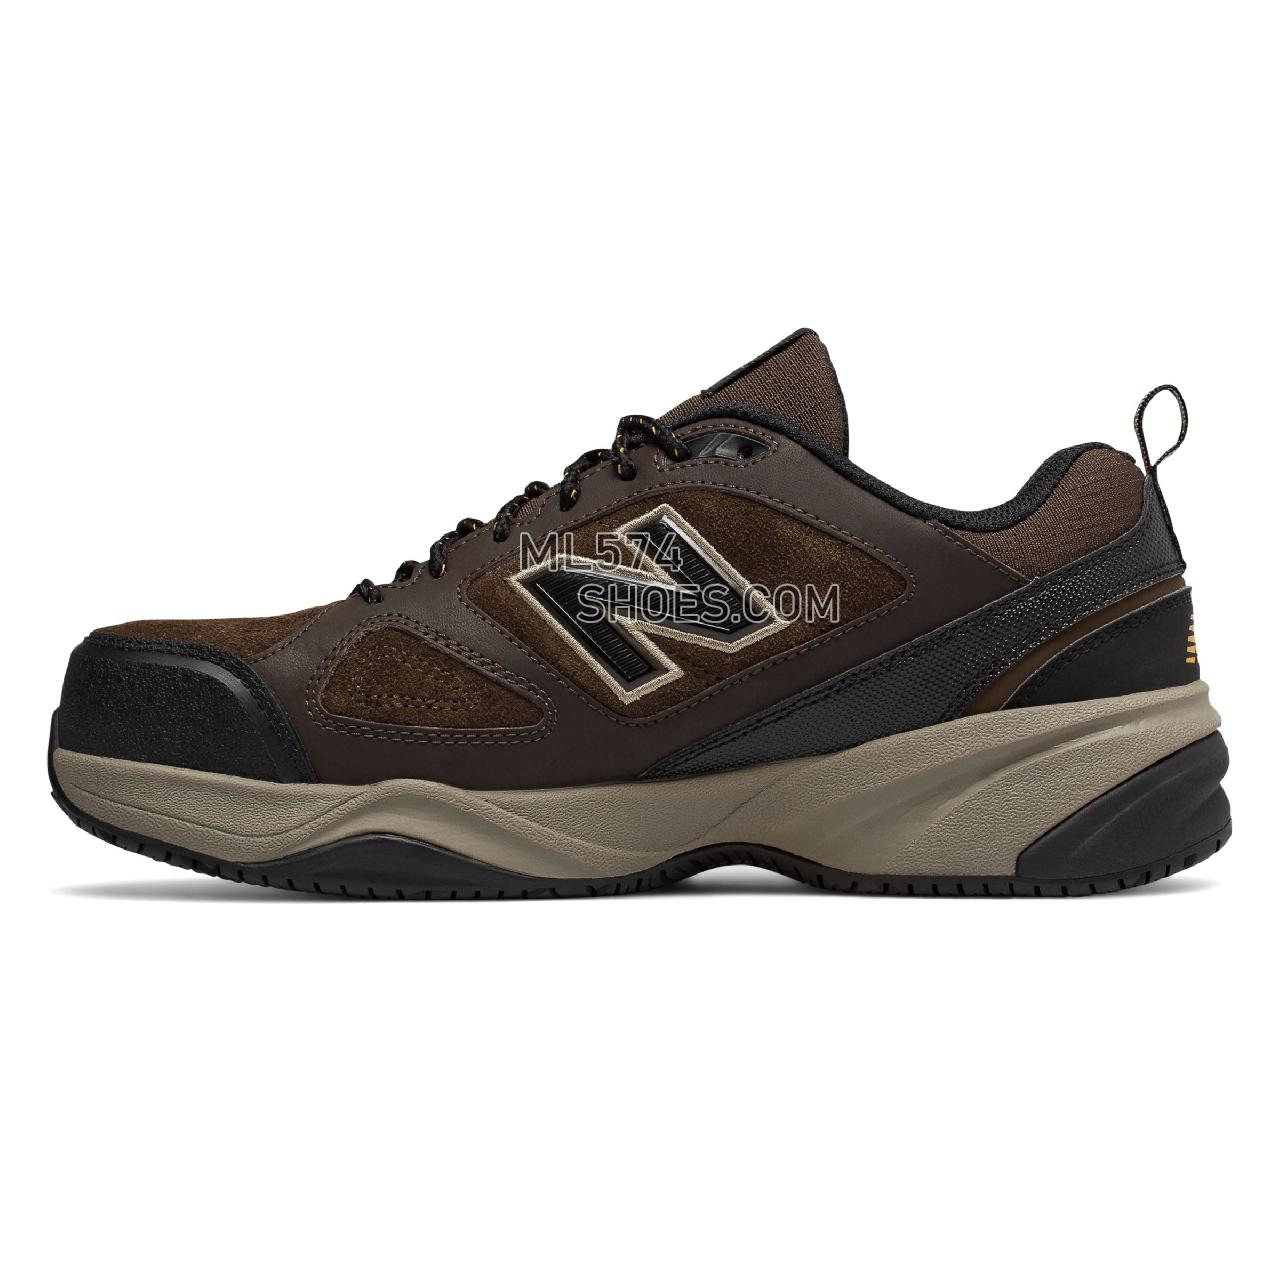 New Balance Steel Toe 627v2 - Men's 627 - Industrial Brown with Black - MID627O2